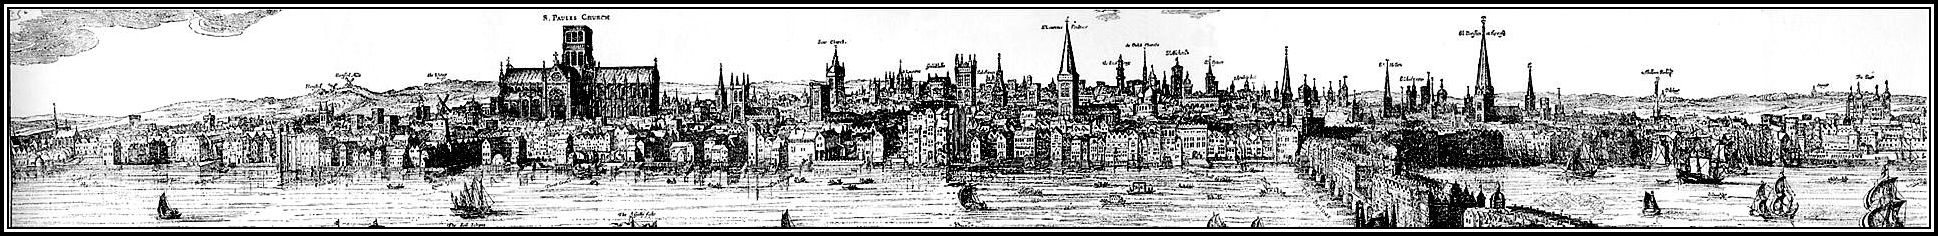 \panorama_of_london_by_claes_van_visscher_1616_no_angels-e1378061705880